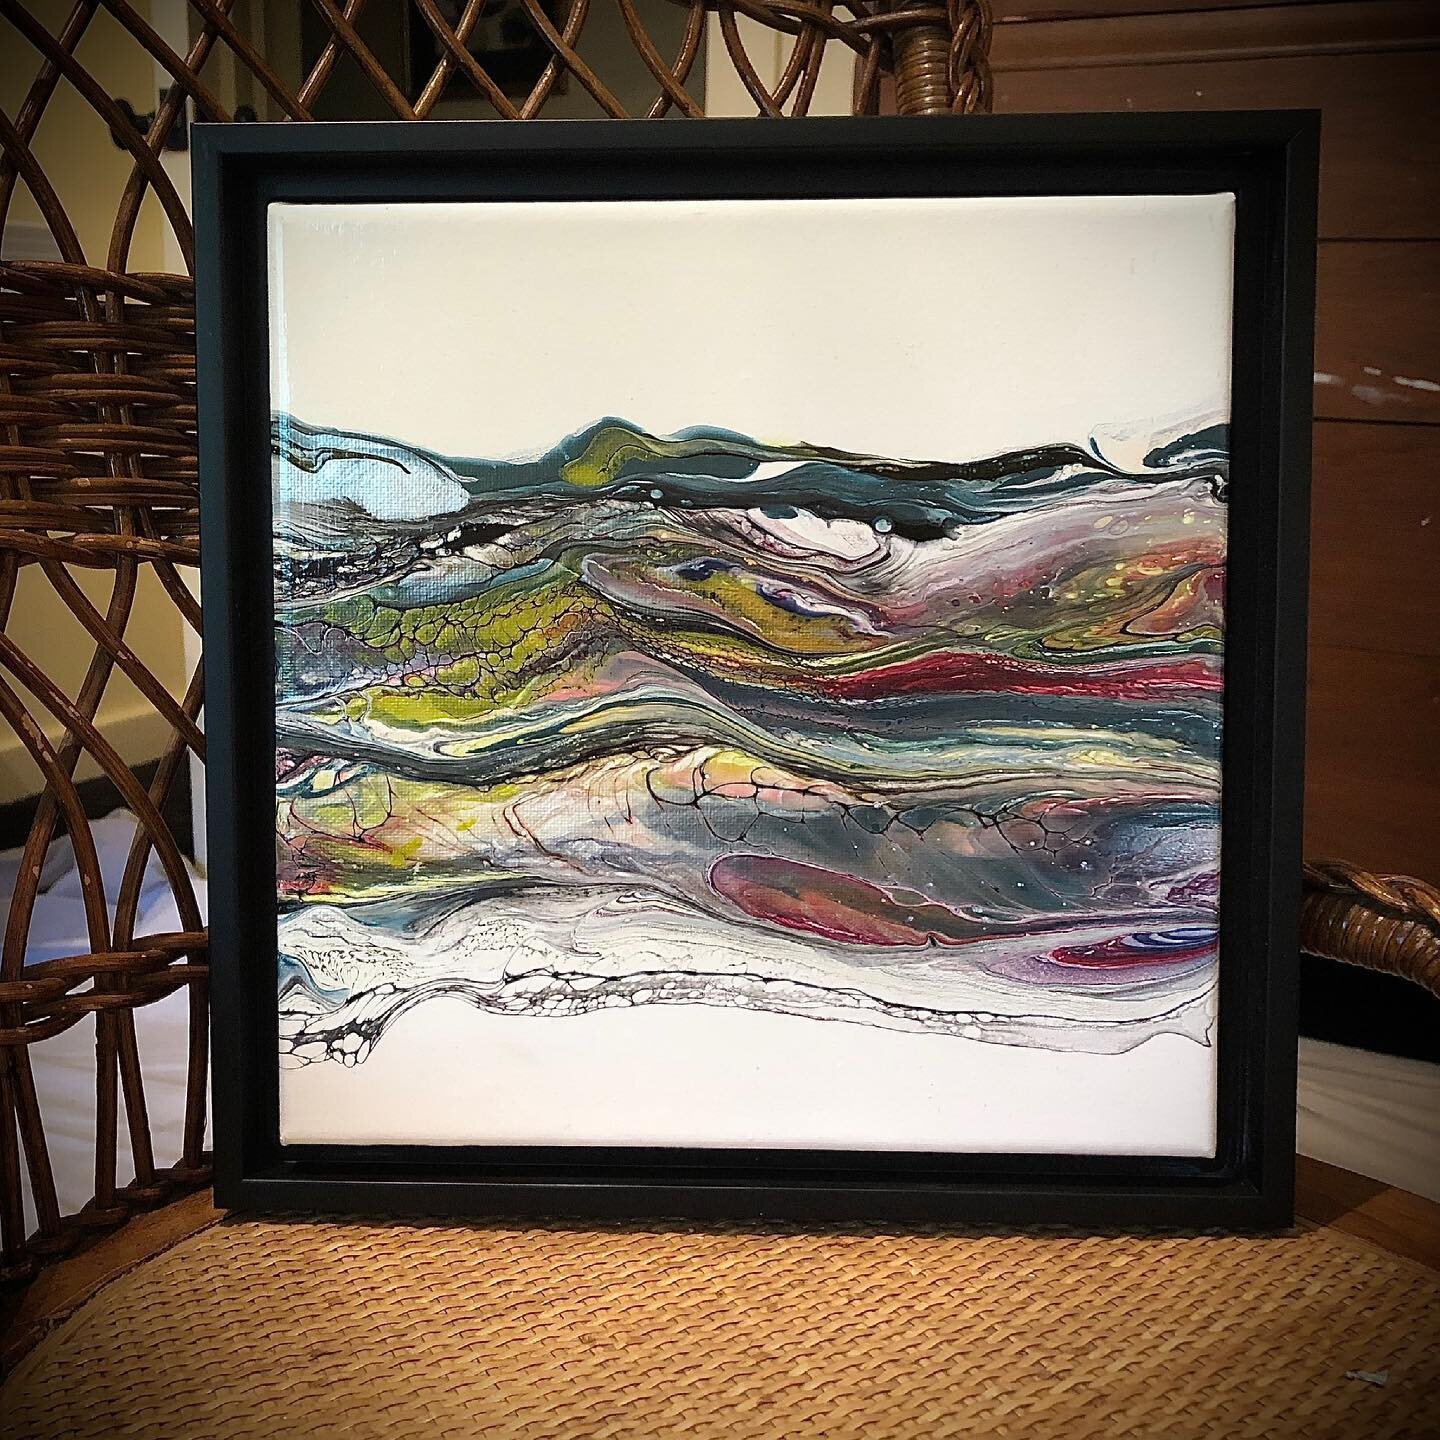 &lsquo;Wave of Contentment&rsquo; is heading to its new home! Thank you, Laura A, for the opportunity to create this for you!